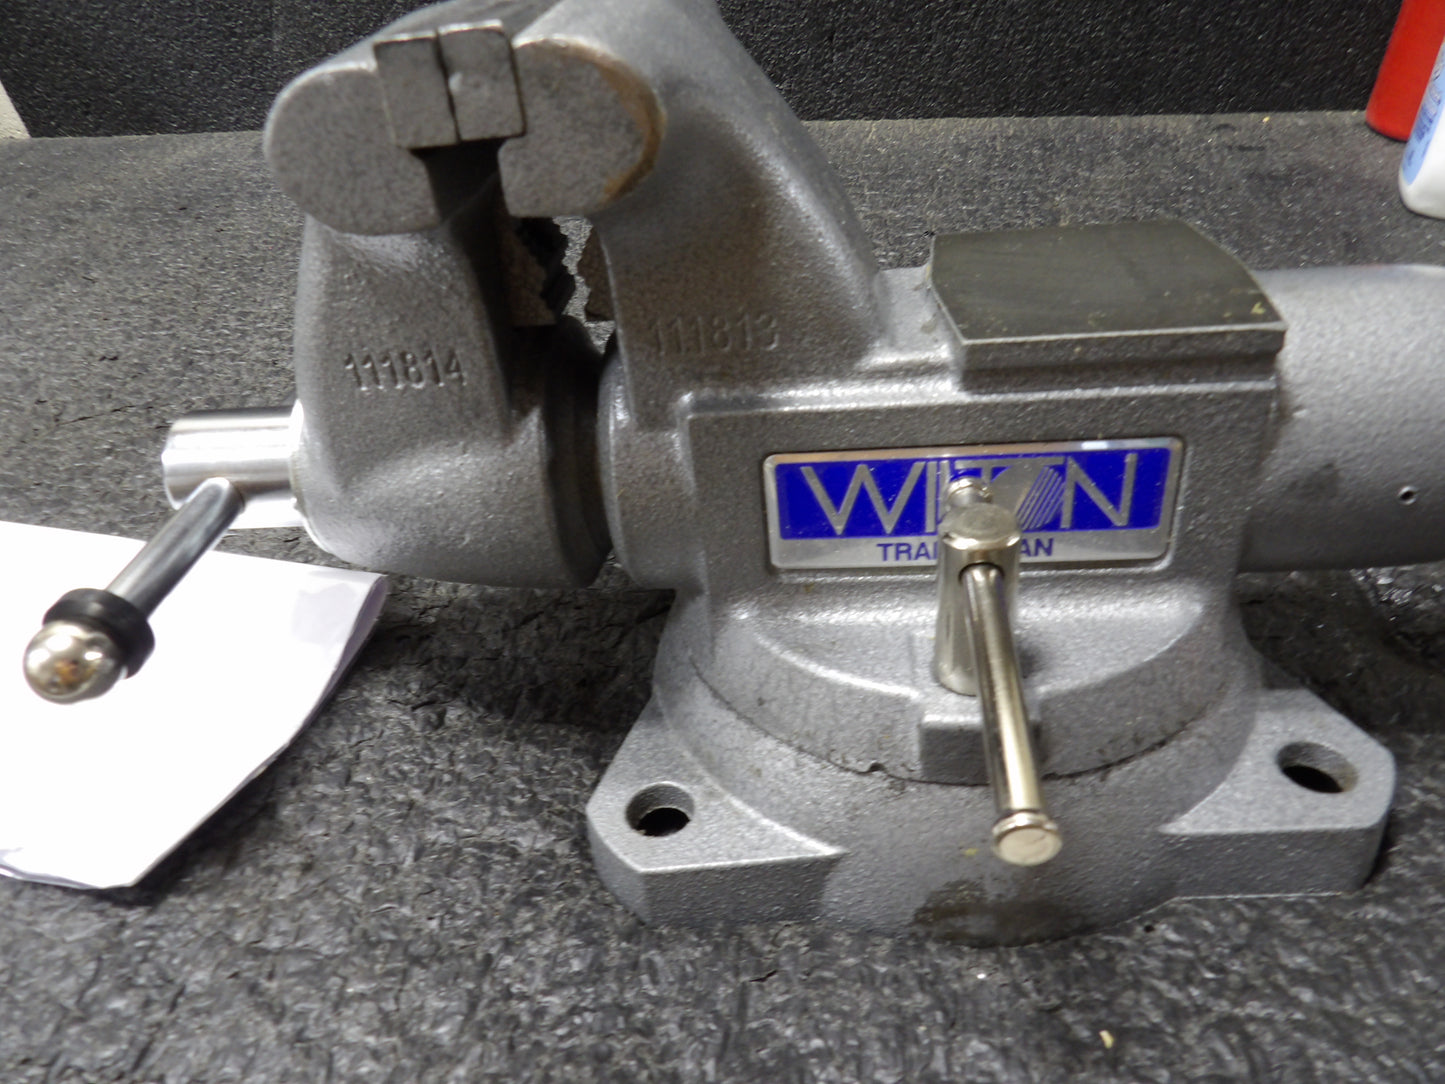 WILTON 1755 Combination Vise: 5 1/2 in Jaw Width, 5 in Max. Opening, Serrated, Swivel (CR00808-WTA24)